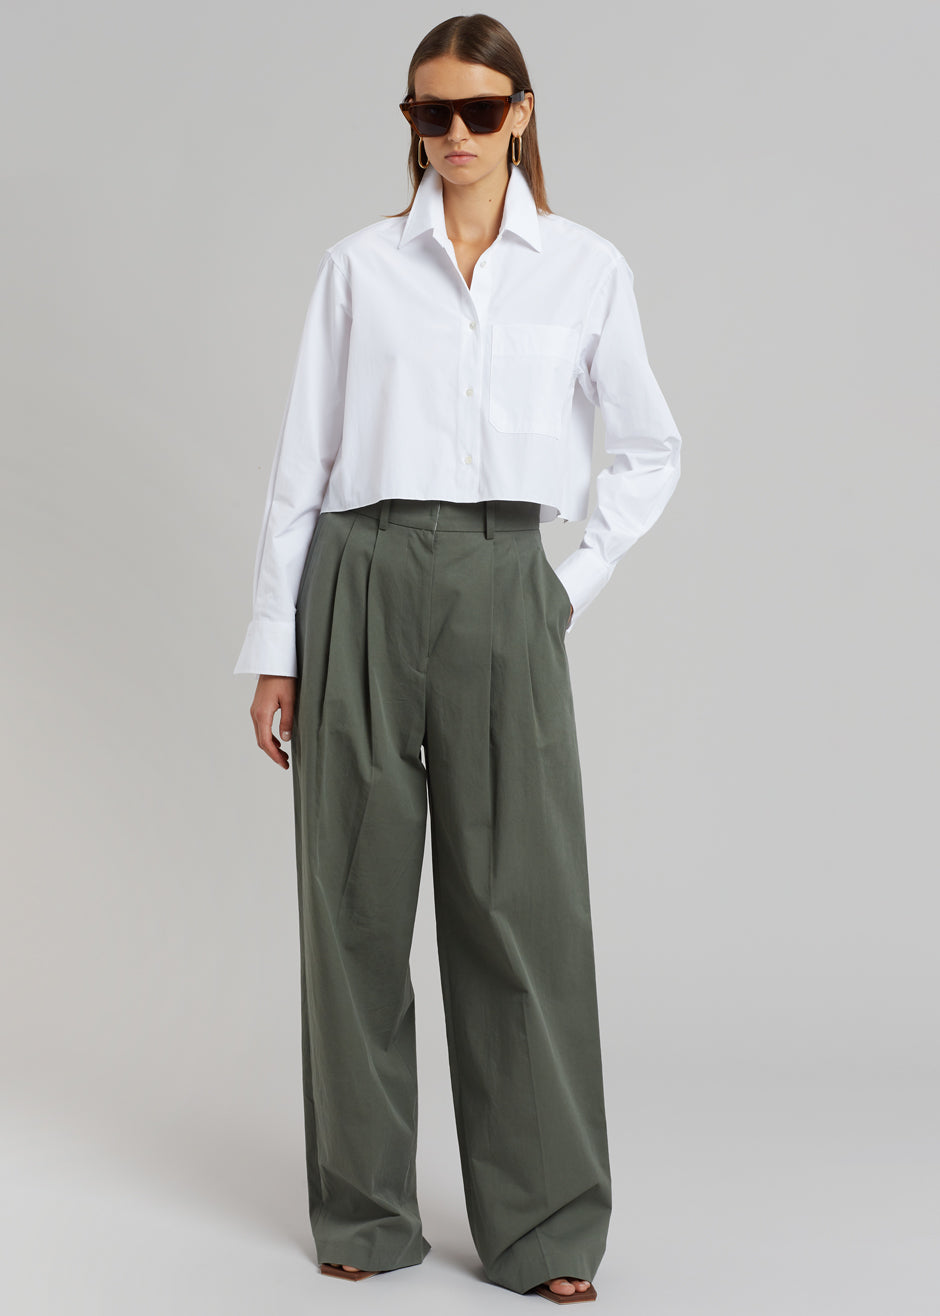 Tansy Cotton Pants - Olive - 4